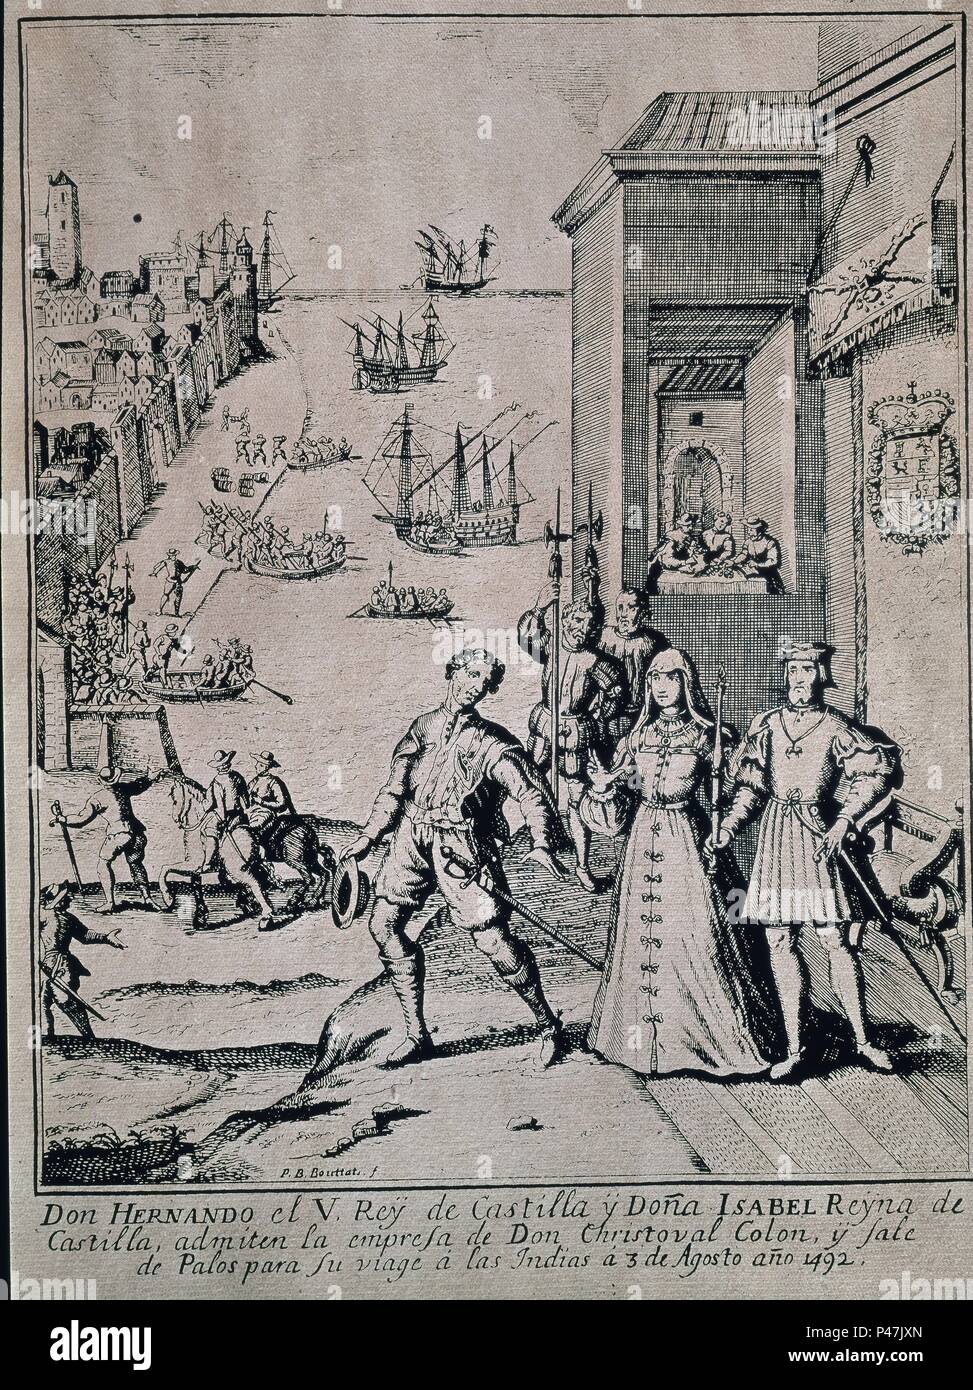 Parting of Columbus with Ferdinand and Isabella, from 'The Narrative and Critical History of America', edited by Justin Winsor, London - 1886 - engraving. Author: Theodor de Bry (1528-1598). Also known as: LOS REYES CATOLICOS DESPIDEN A COLON EN PALOS 3-8-1492. Stock Photo